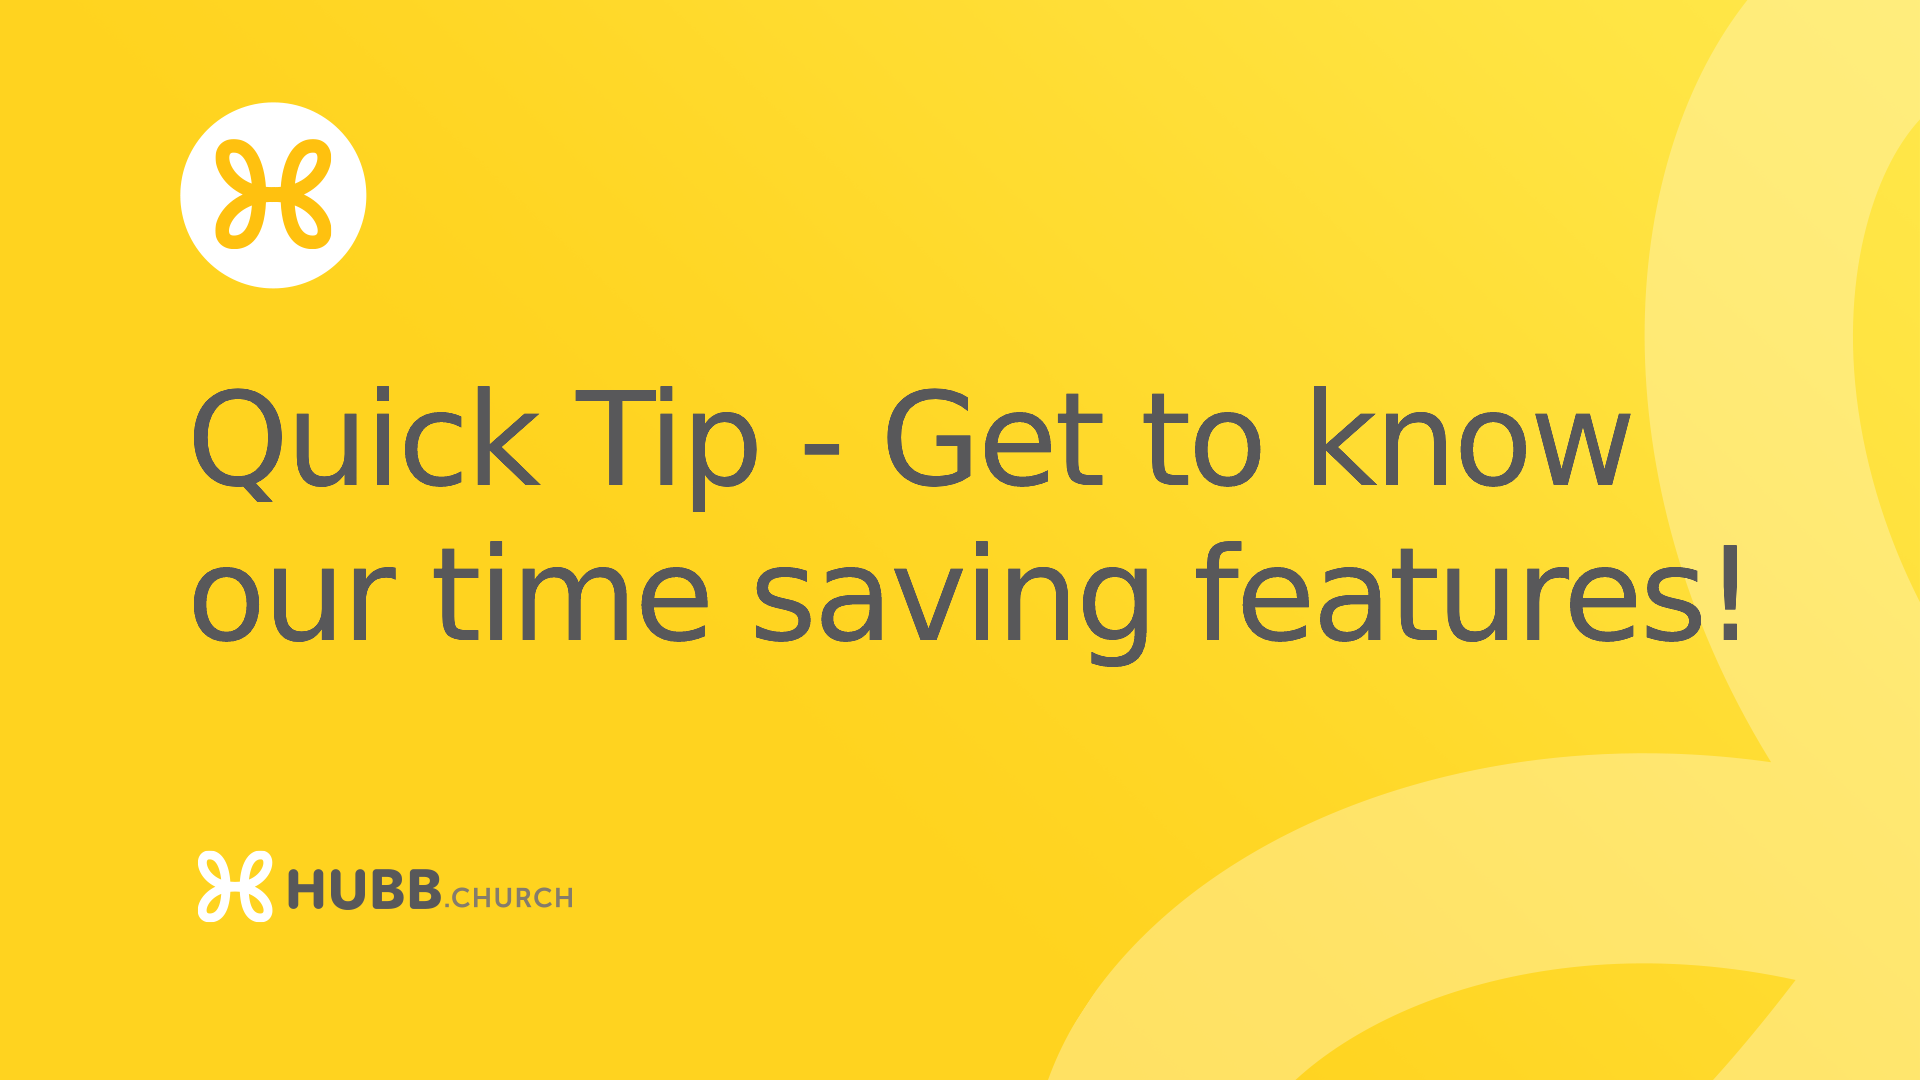 Quick tip – get to know our time saving features!